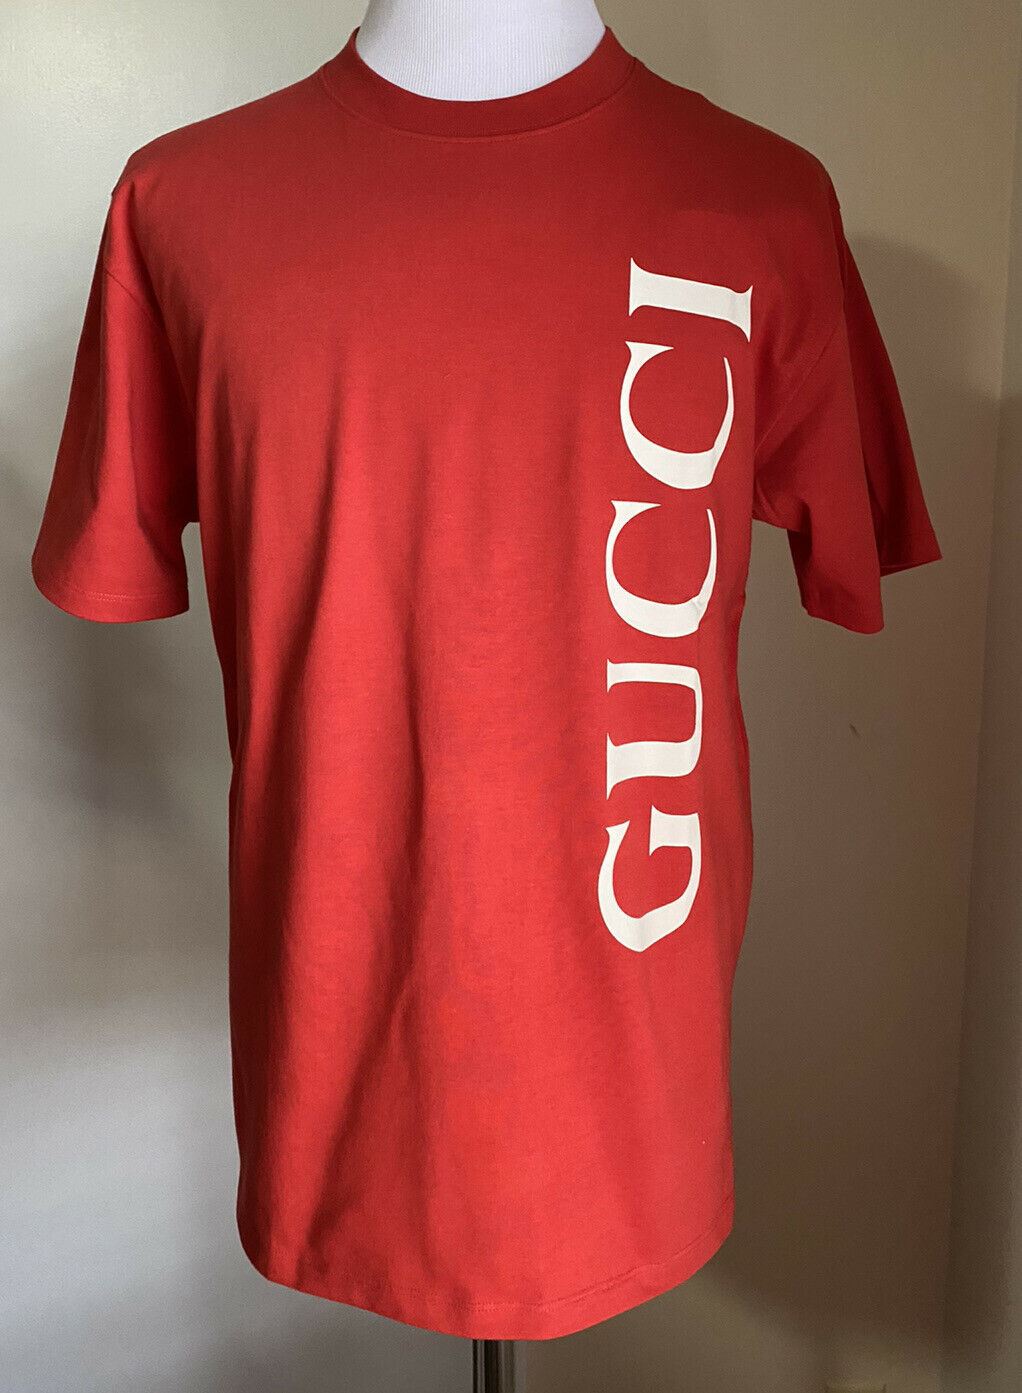 New Gucci Men’s Short Sleeve T Shirt Red Size M Italy